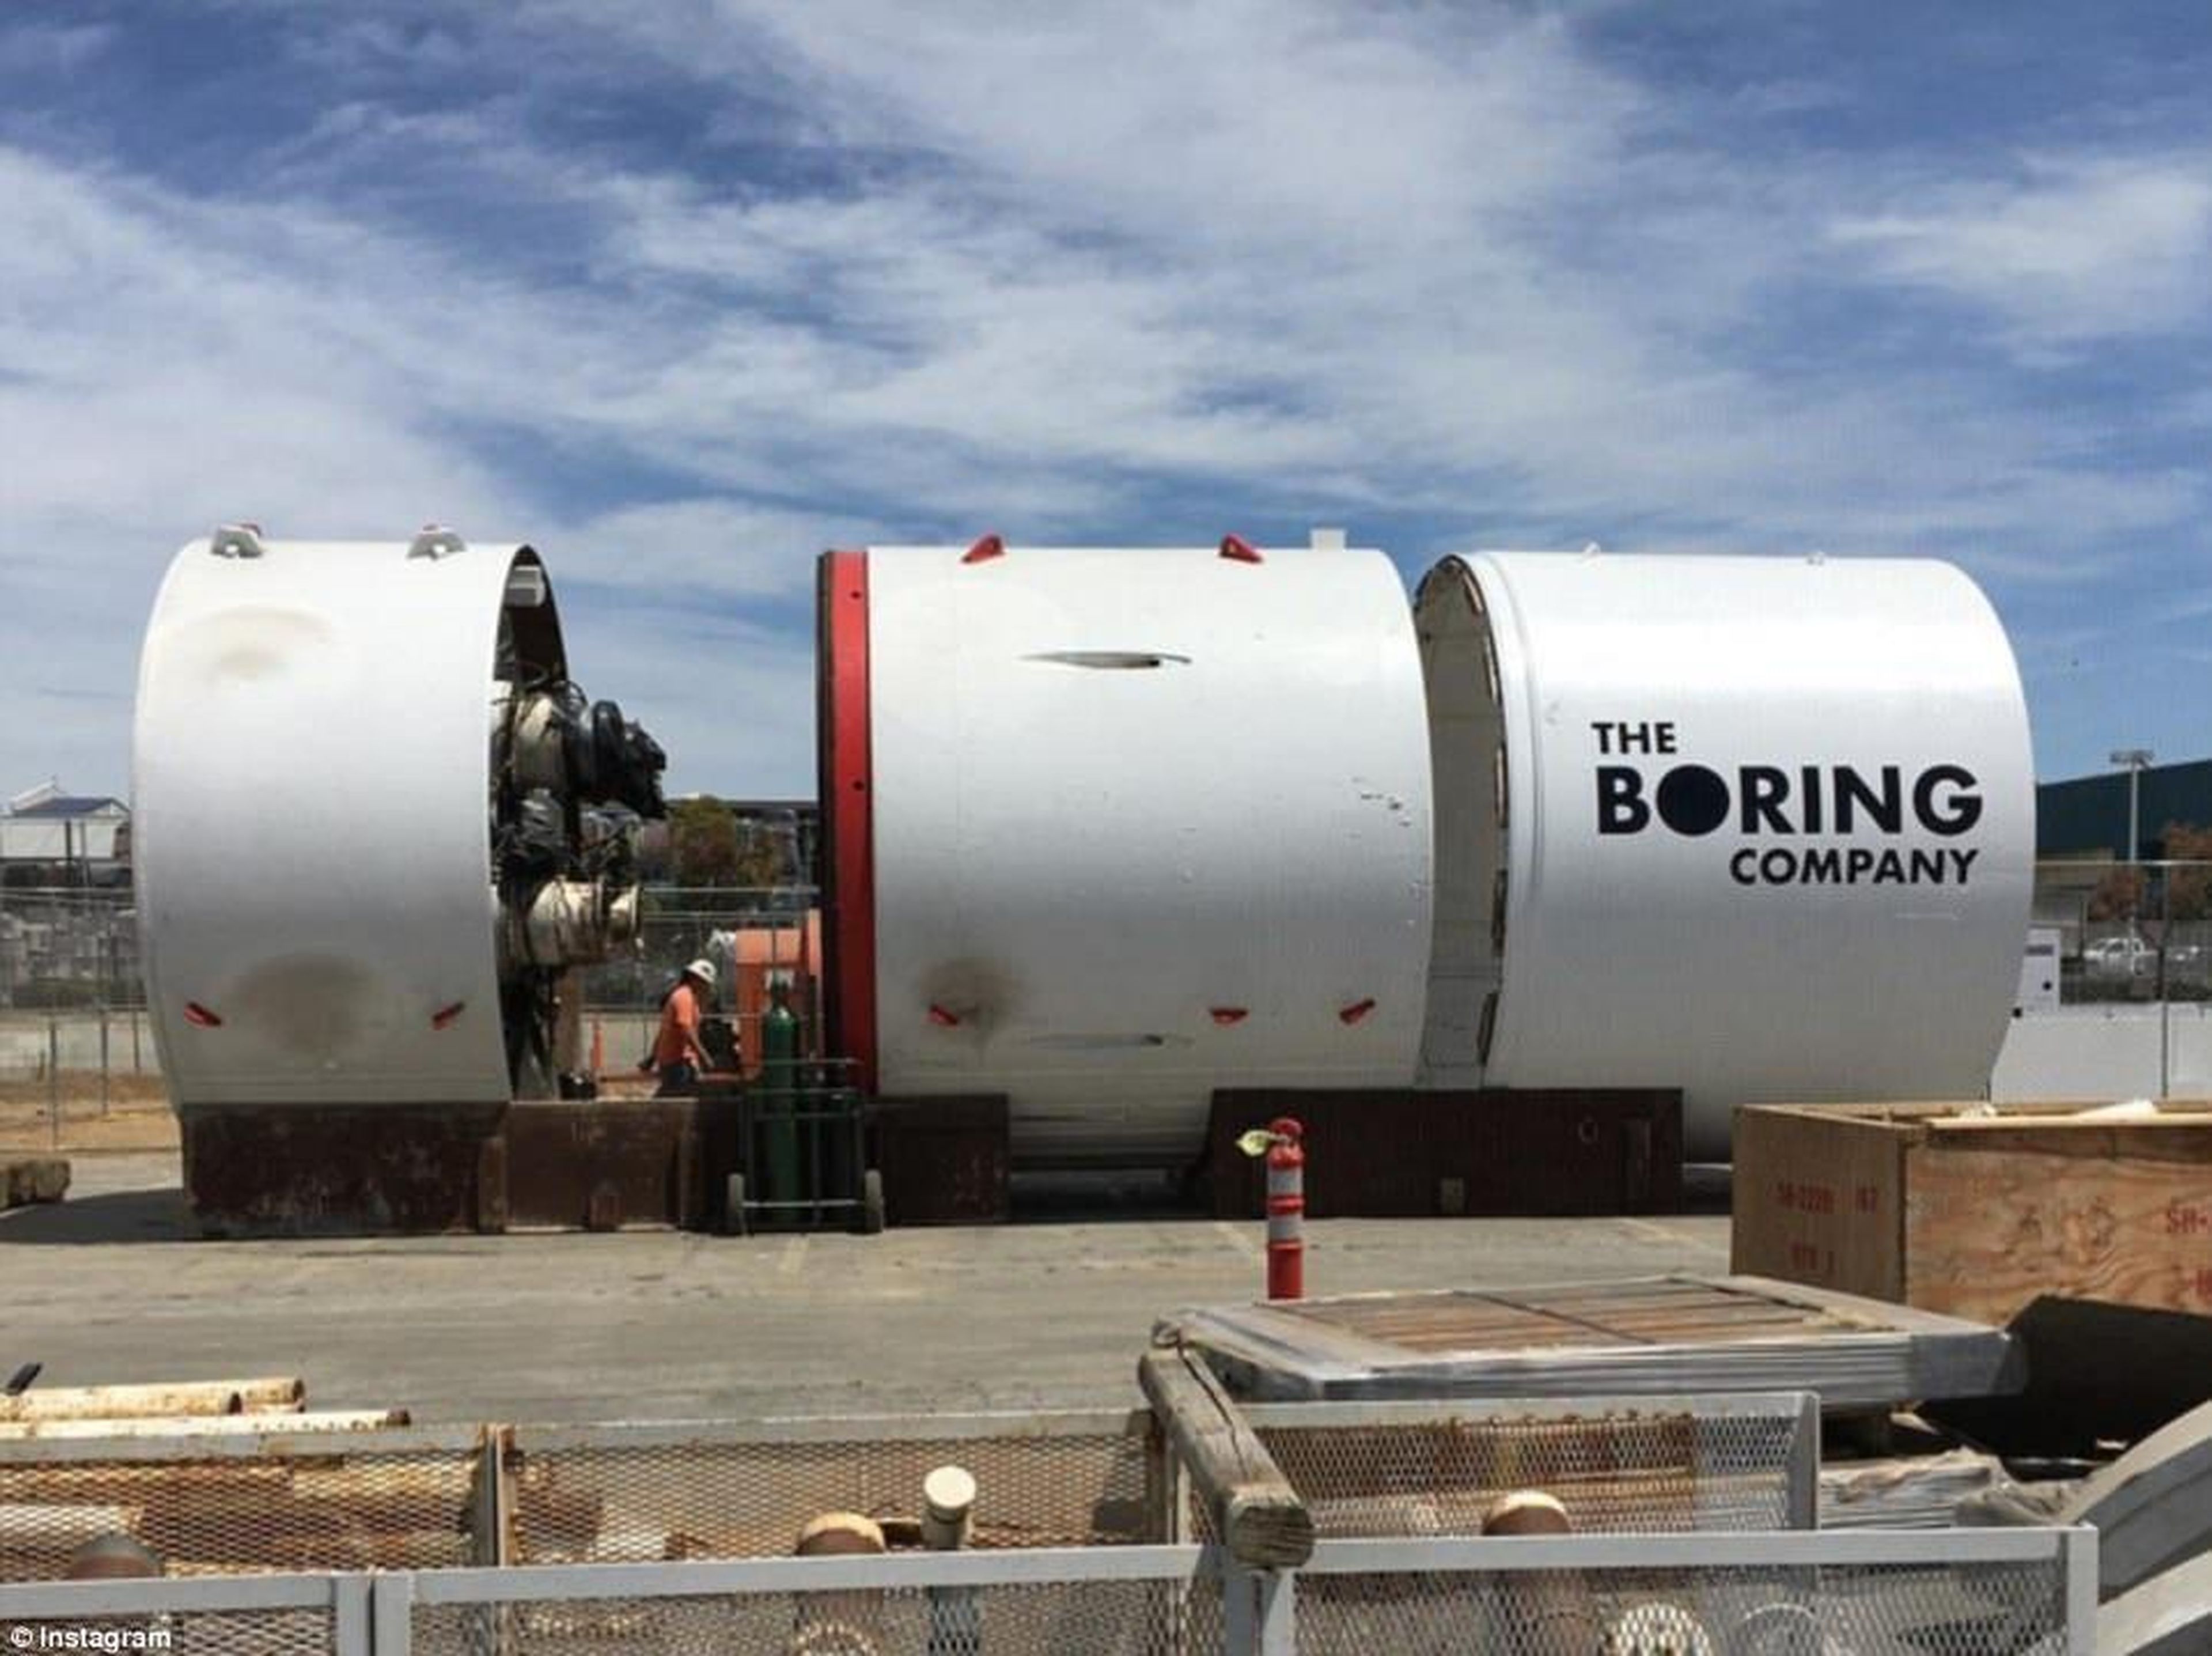 15. The Boring Company. Frustrated with Los Angeles traffic, Musk founded the Boring Company to dig tunnels under the city's freeways. It would eventually ink a deal with Las Vegas to develop a transit project.